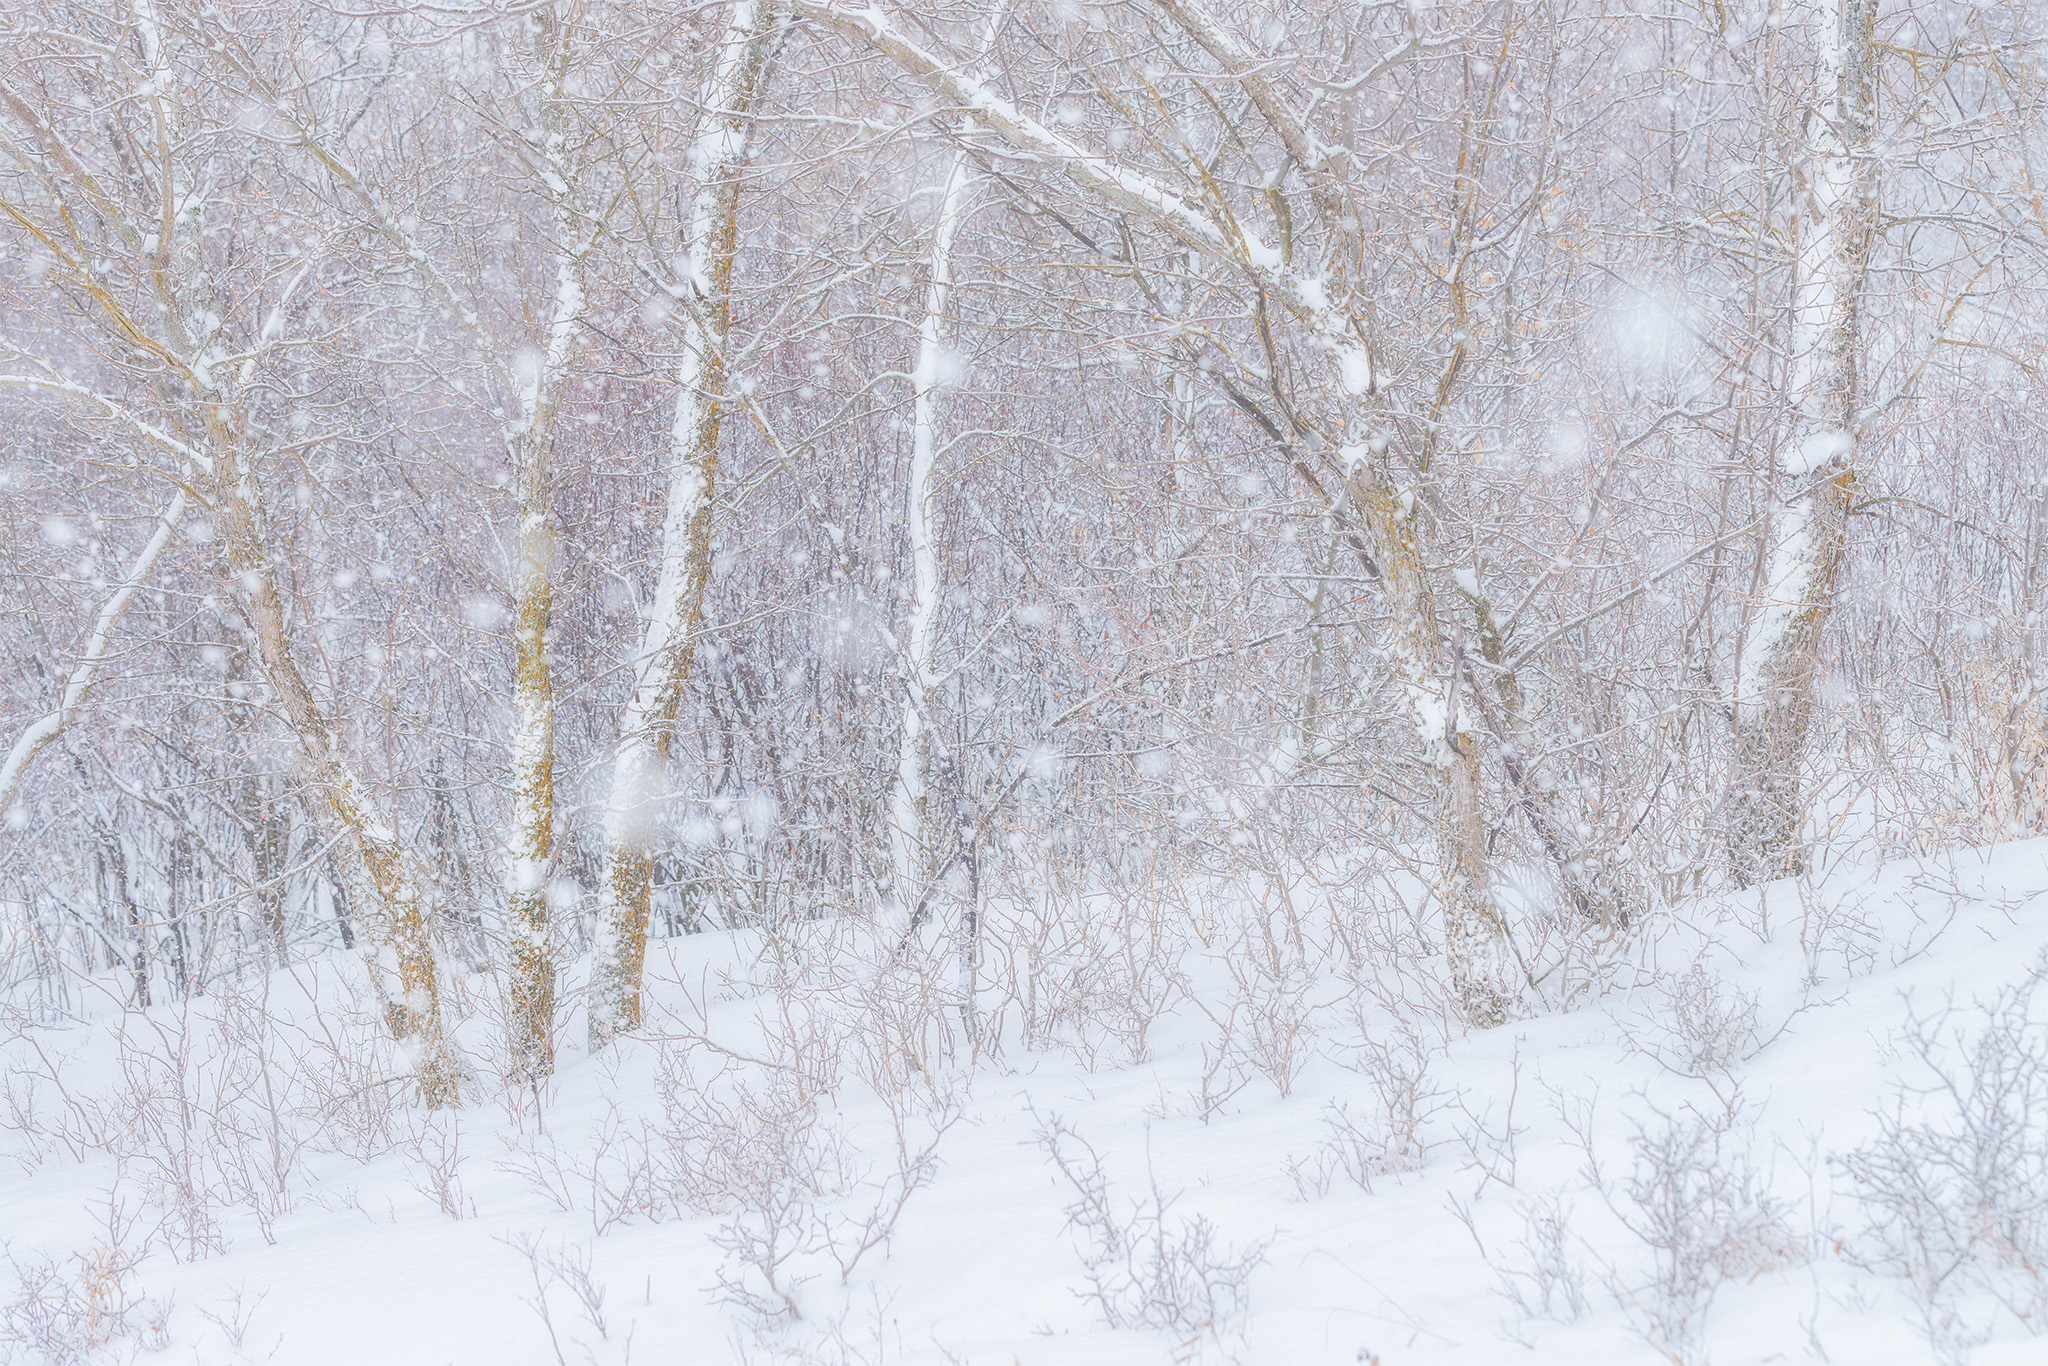 An intimate landscape photograph of trees in the snow at Wascana Trails, Saskatchewan